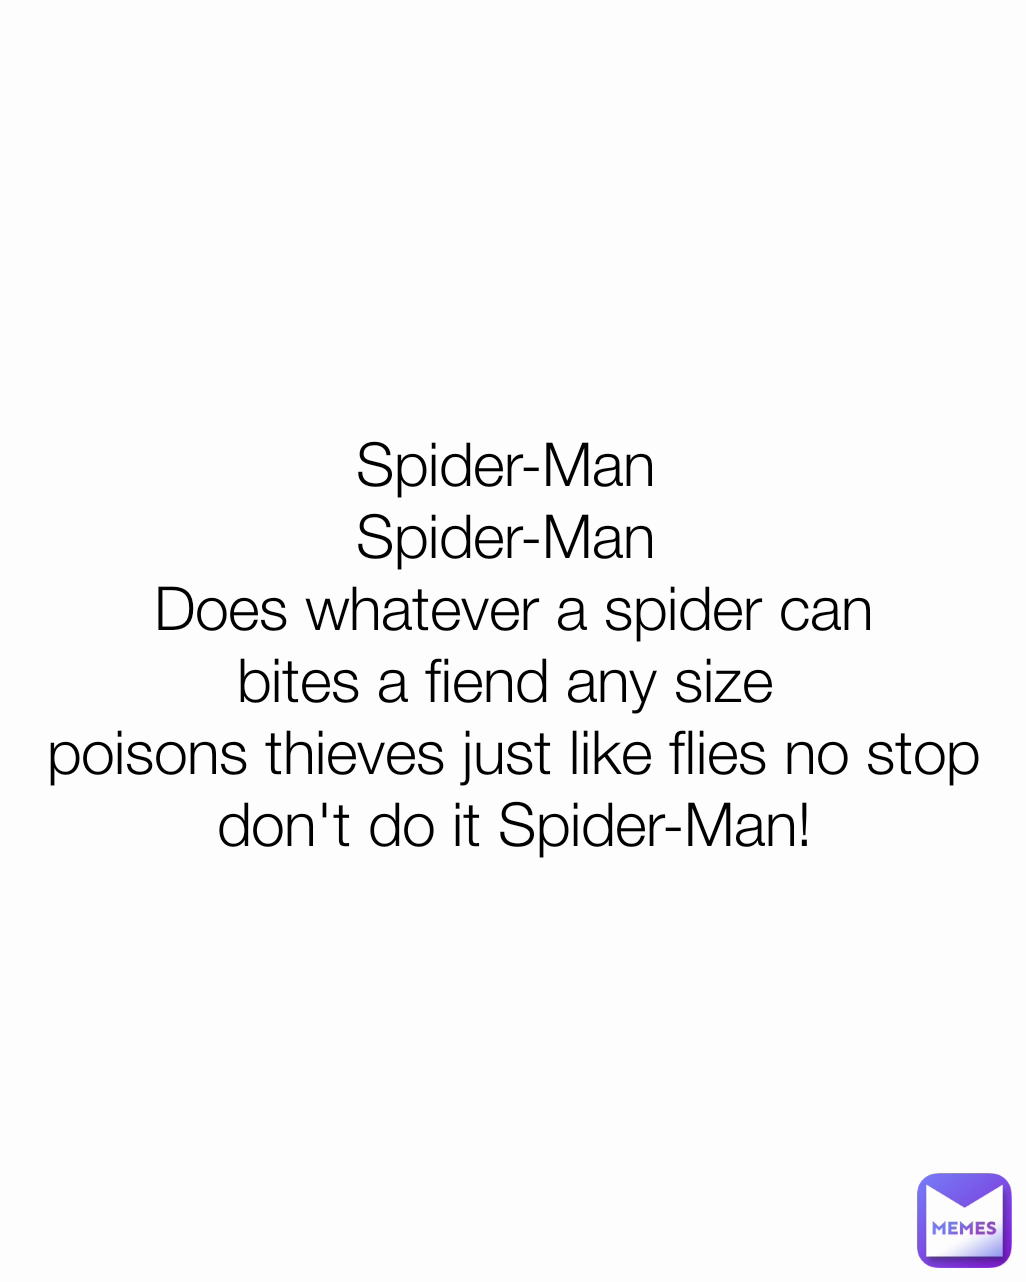 Spider-Man 
Spider-Man 
Does whatever a spider can
bites a fiend any size 
poisons thieves just like flies no stop don't do it Spider-Man!